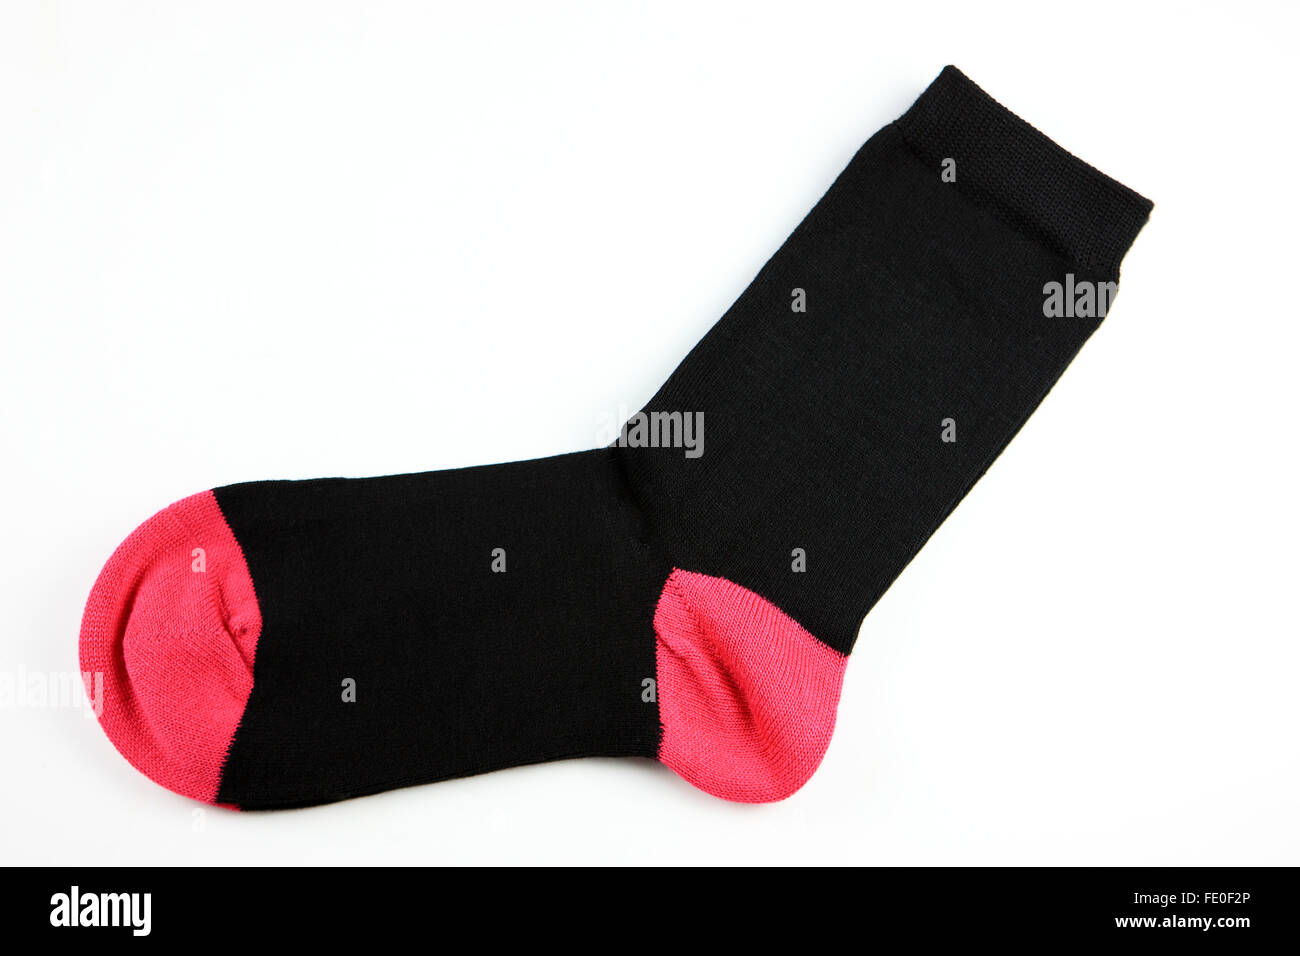 Black socks with pink toe and heel patches on a white background Stock Photo